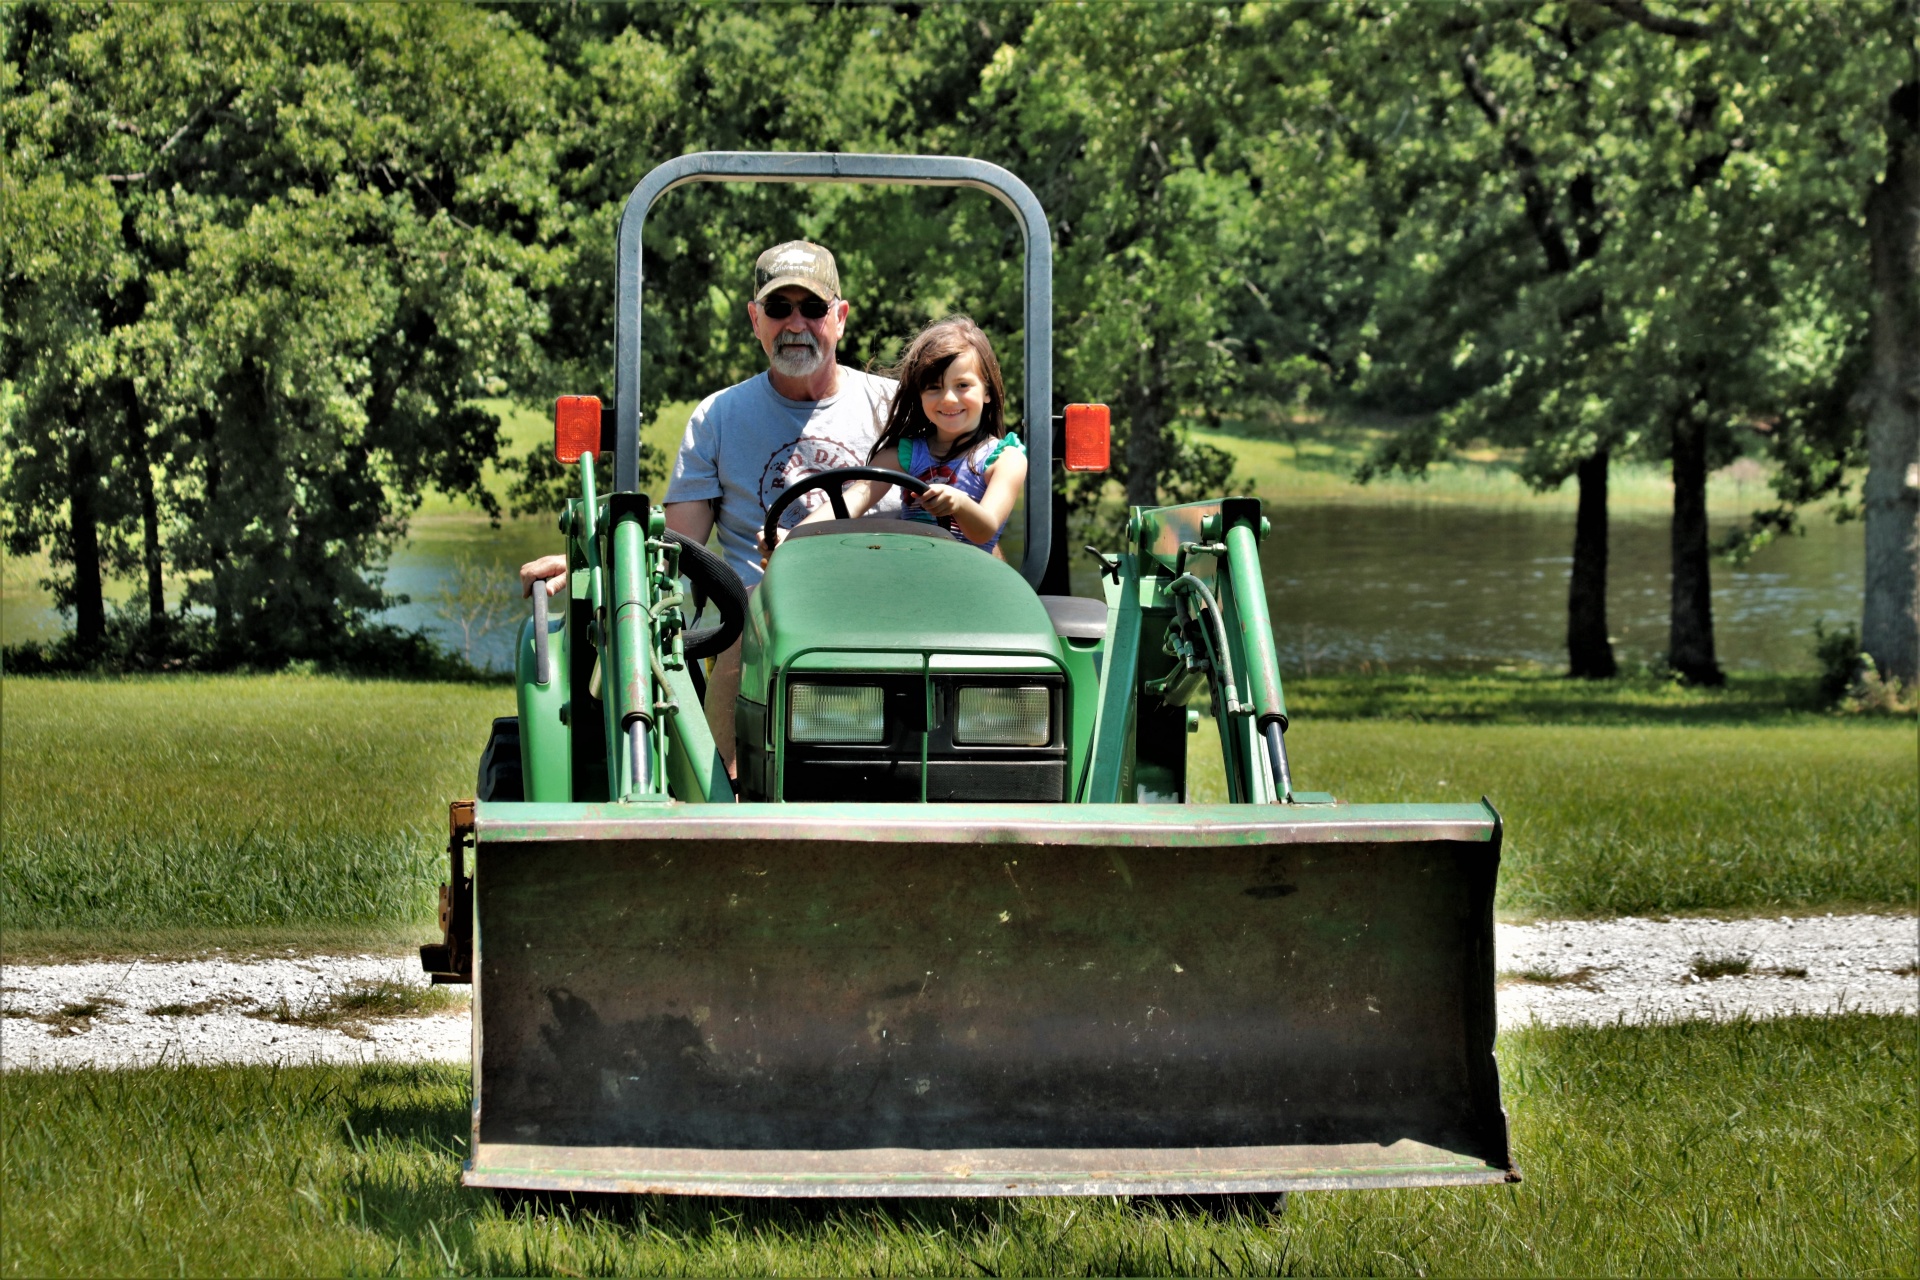 A cute little girl and her grandfather driving a farm tractor in a green grassy country field with trees and a farm pond in the background.